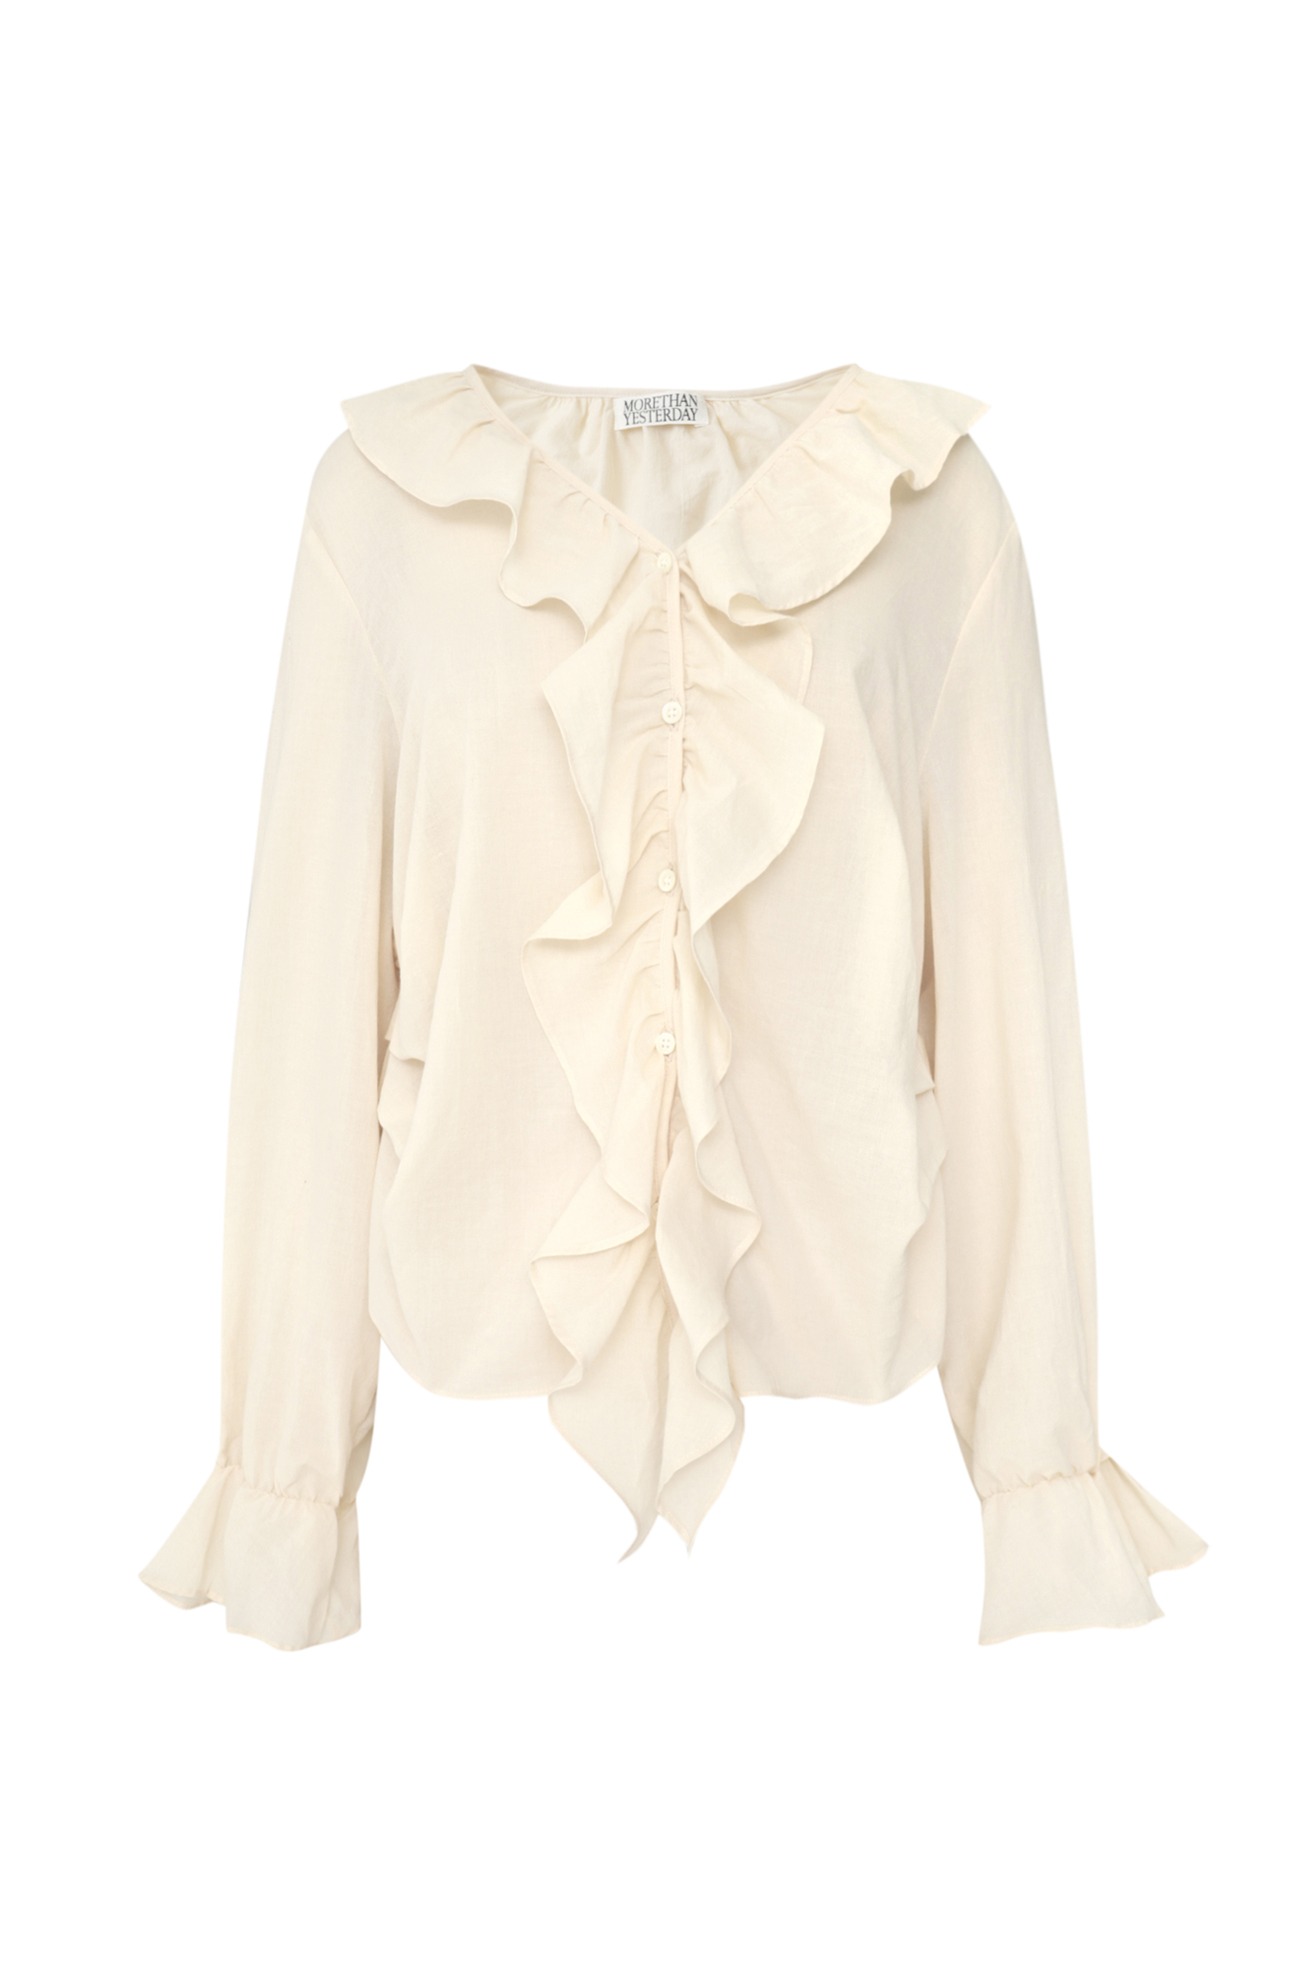 Ruffled Blouse (5/20일 순차발송)